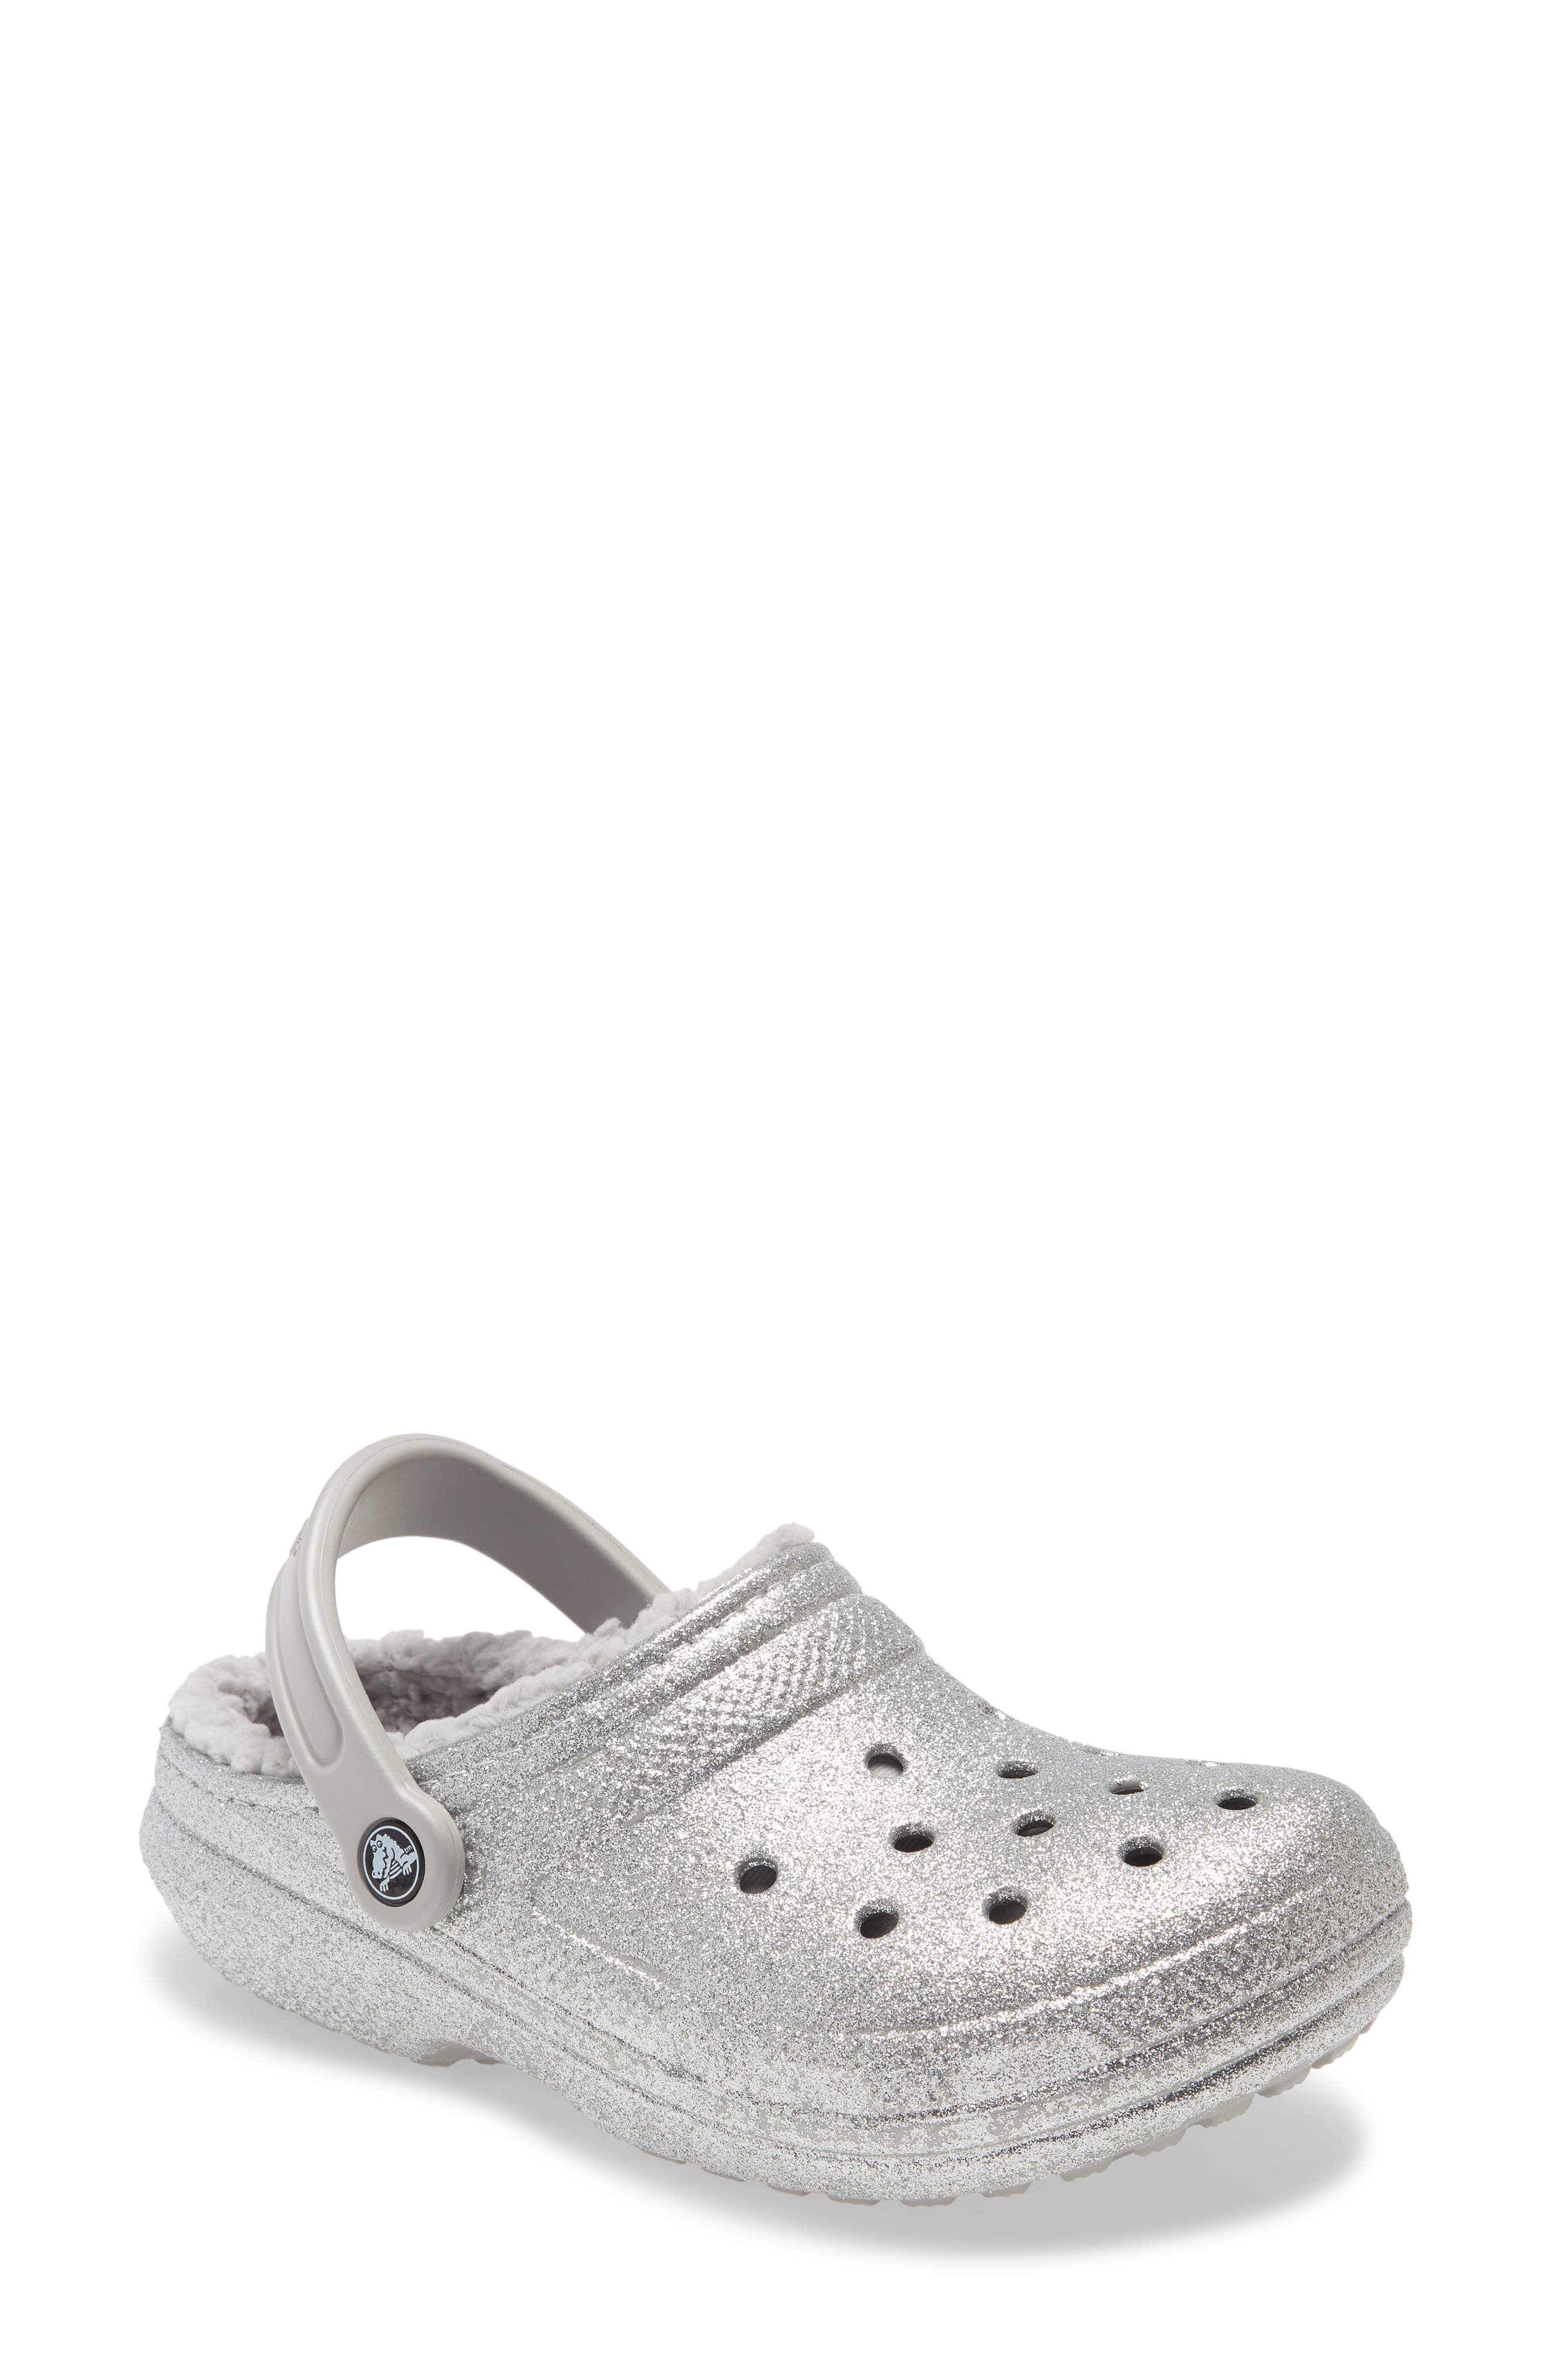 sparkly crocs with fur